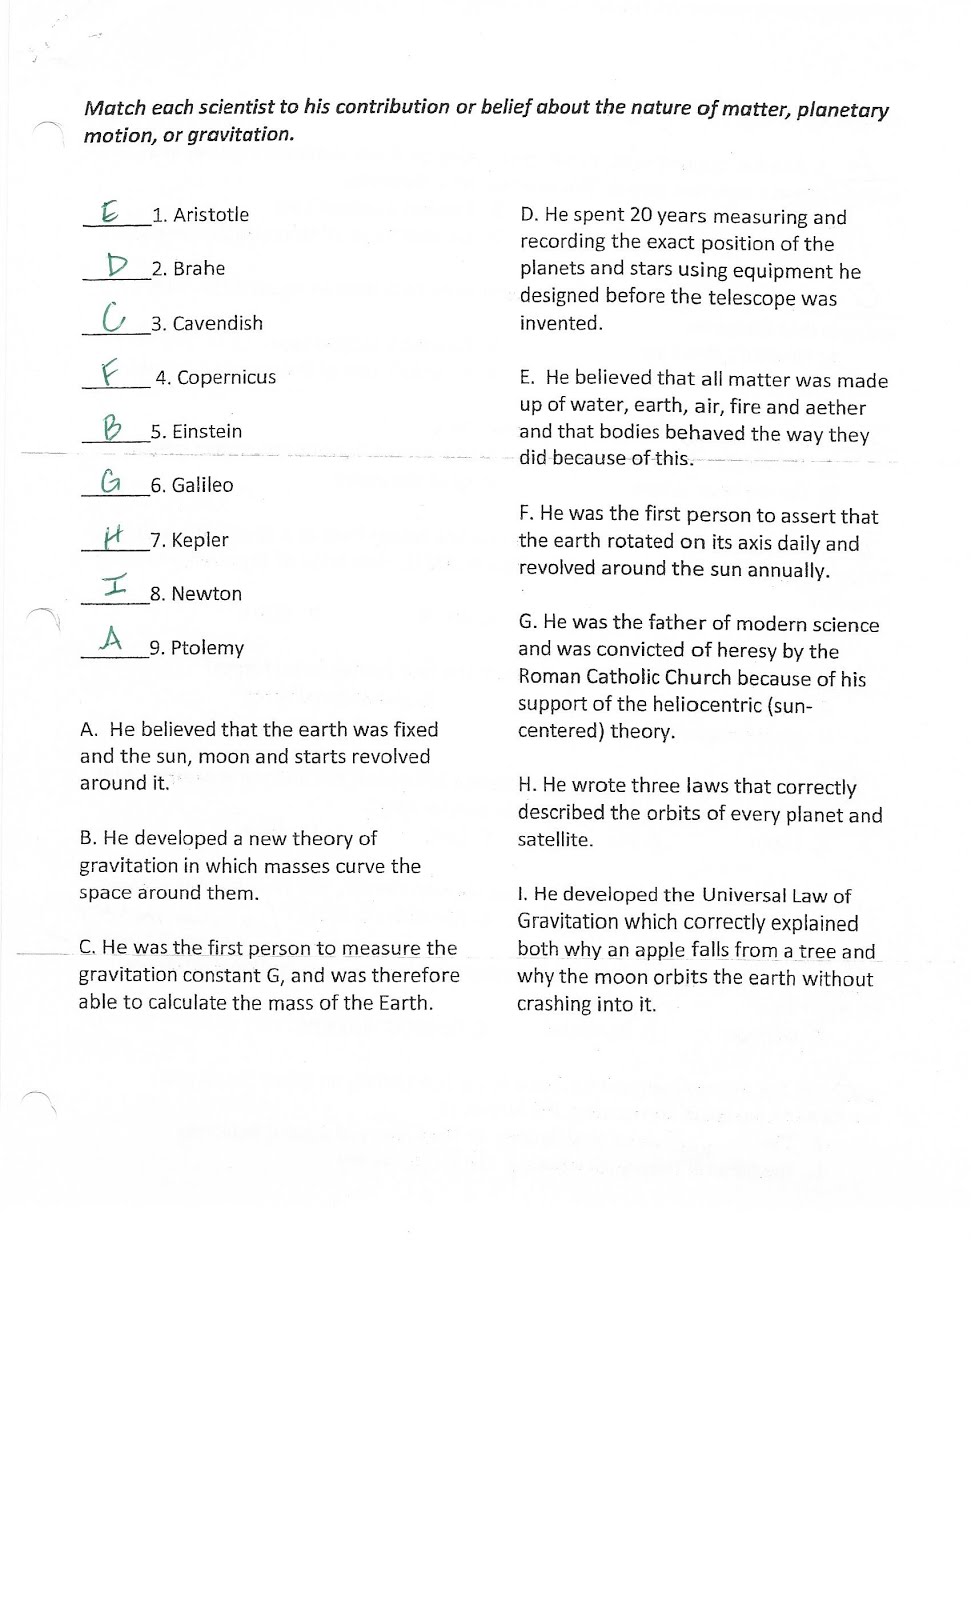 physics-with-coach-t-centripetal-acceleration-universal-gravitation-and-laws-worksheet-answers